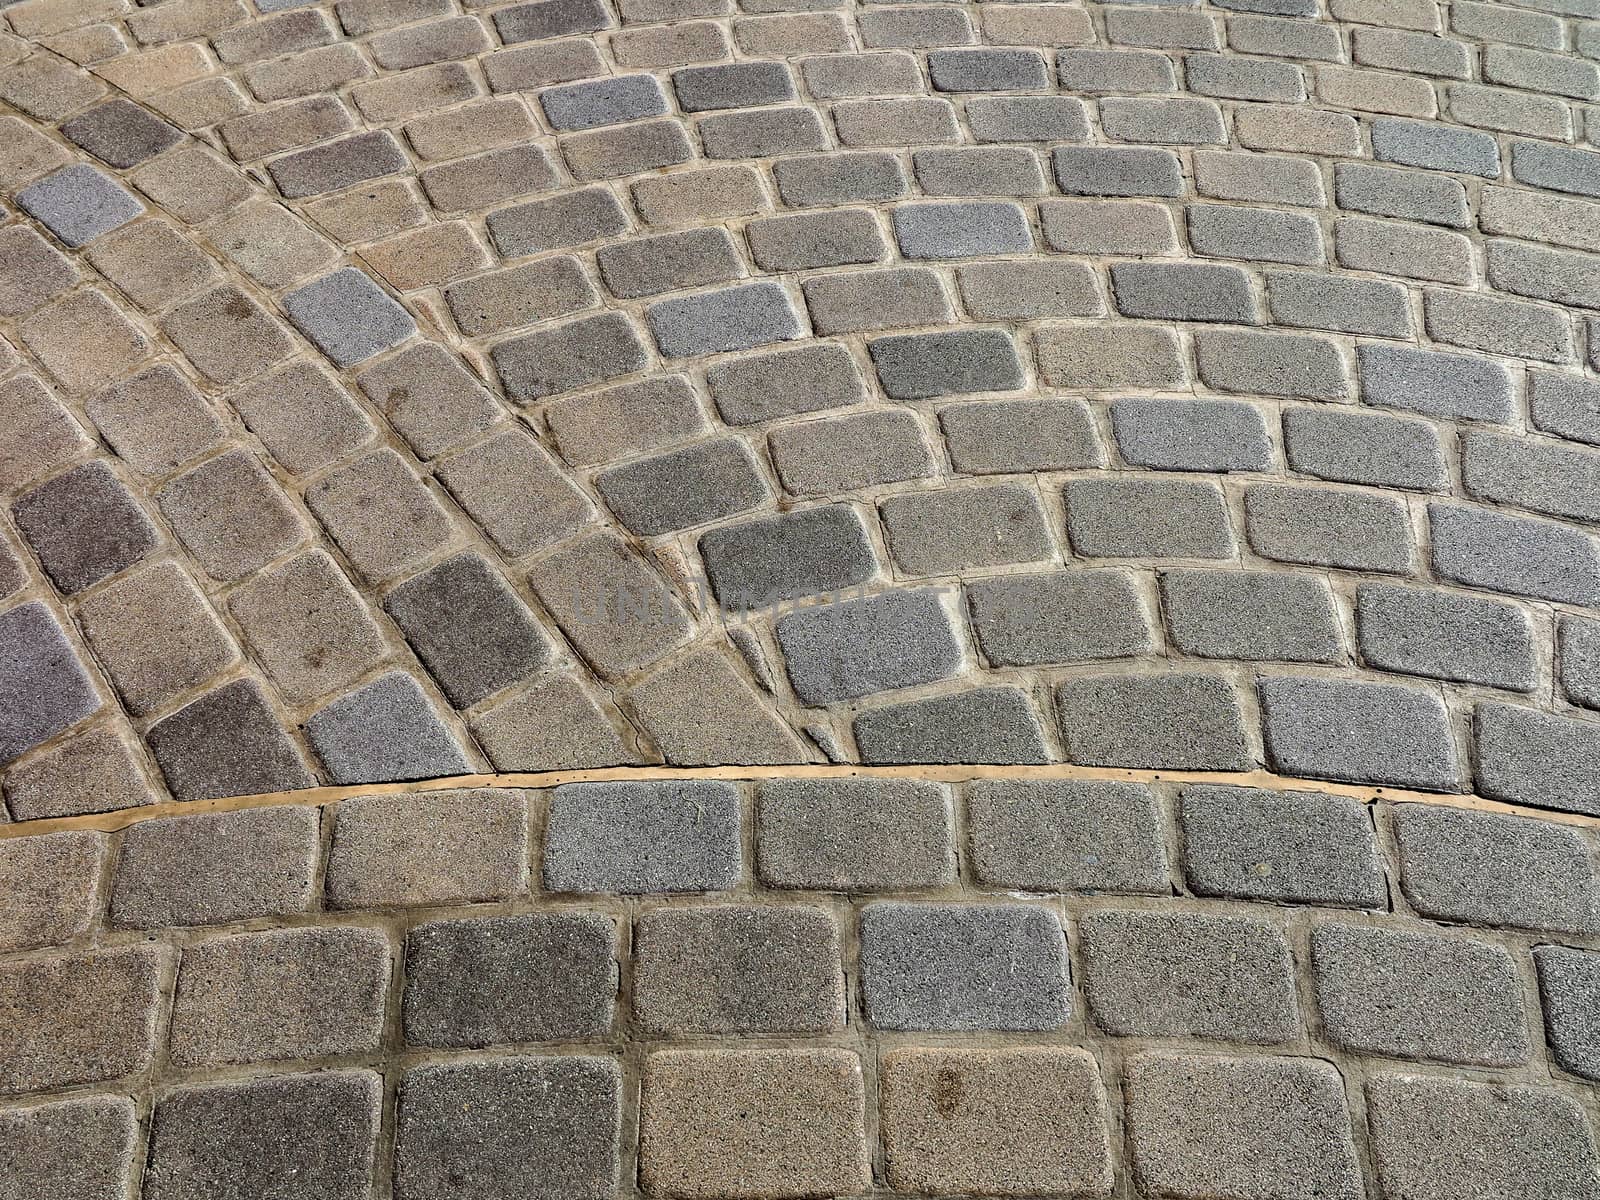 A floor of bricks in different directions